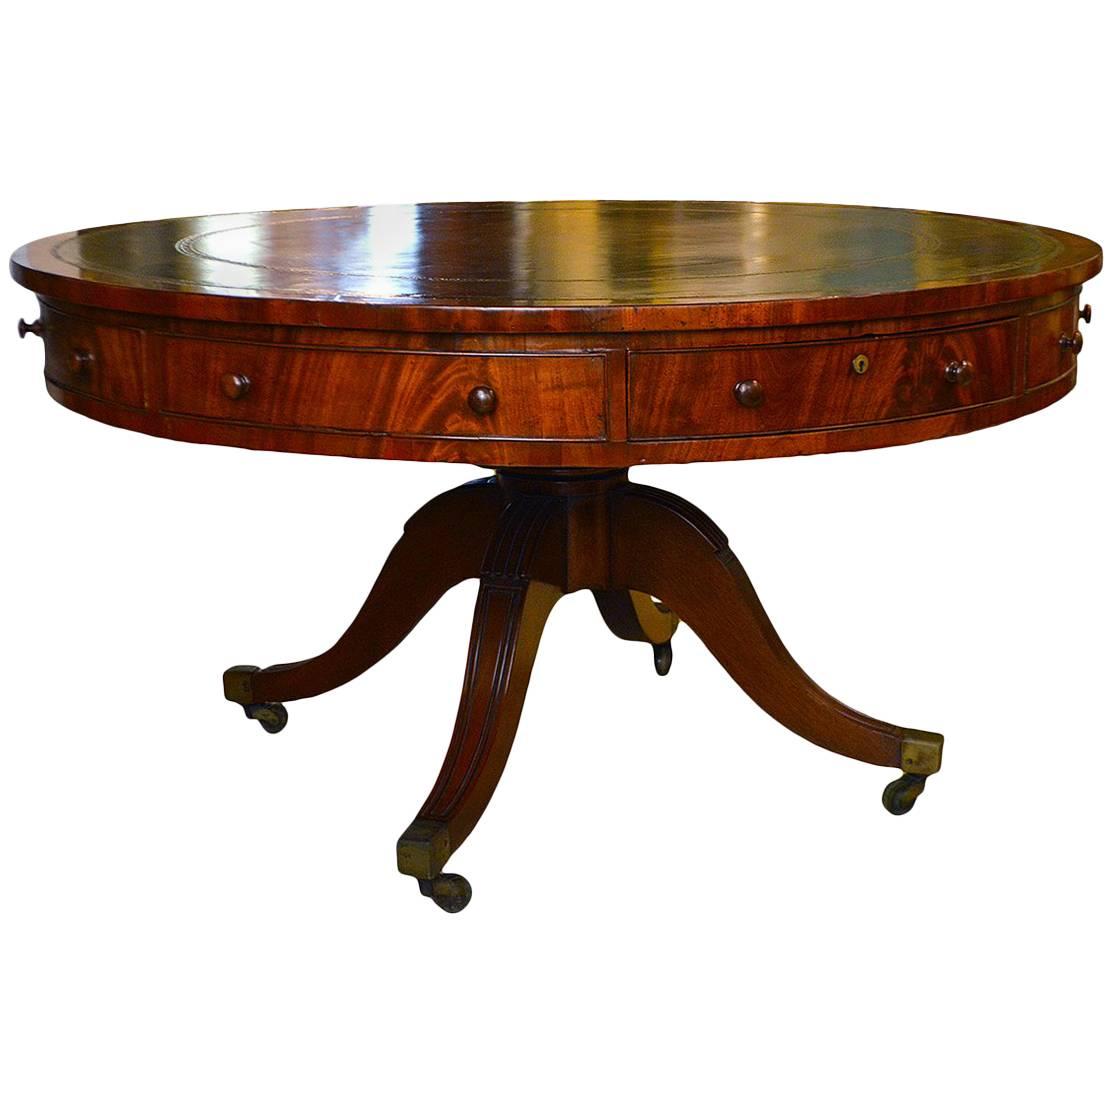 19th Century Mahogany Leather Top Rent Table with 4 Drawers & 4 Faux Drawers